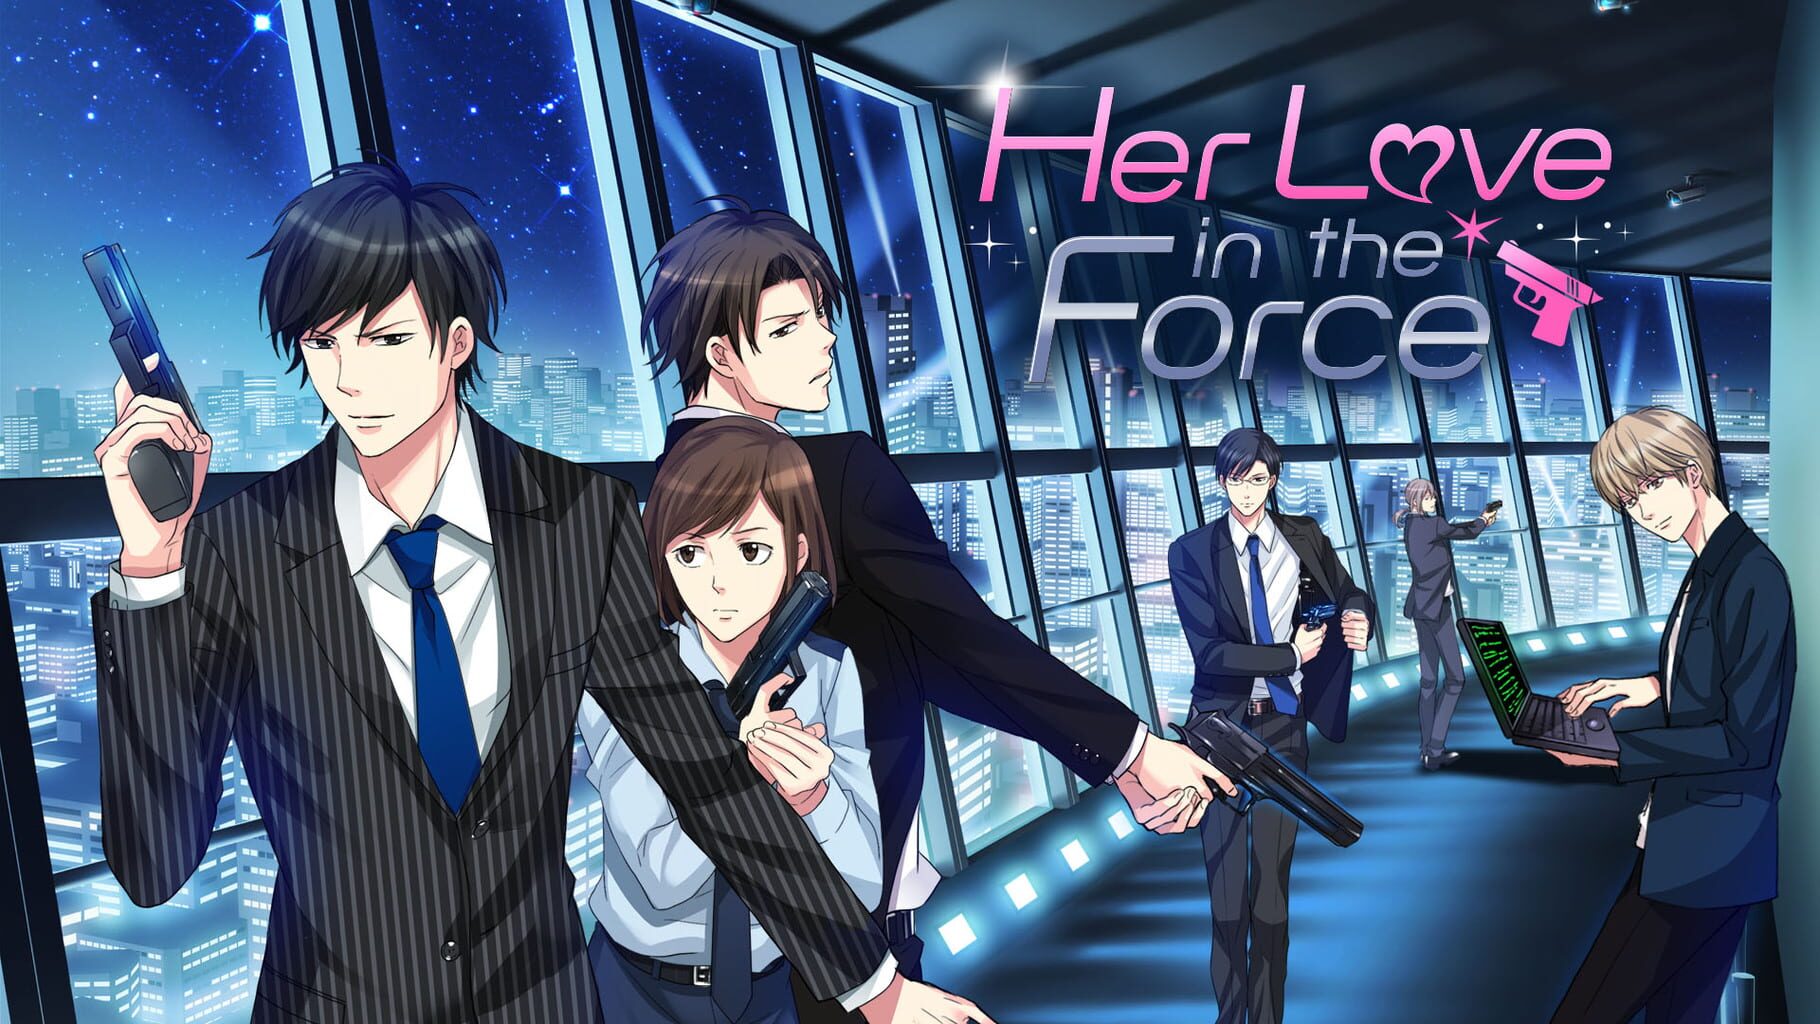 Her Love in the Force artwork